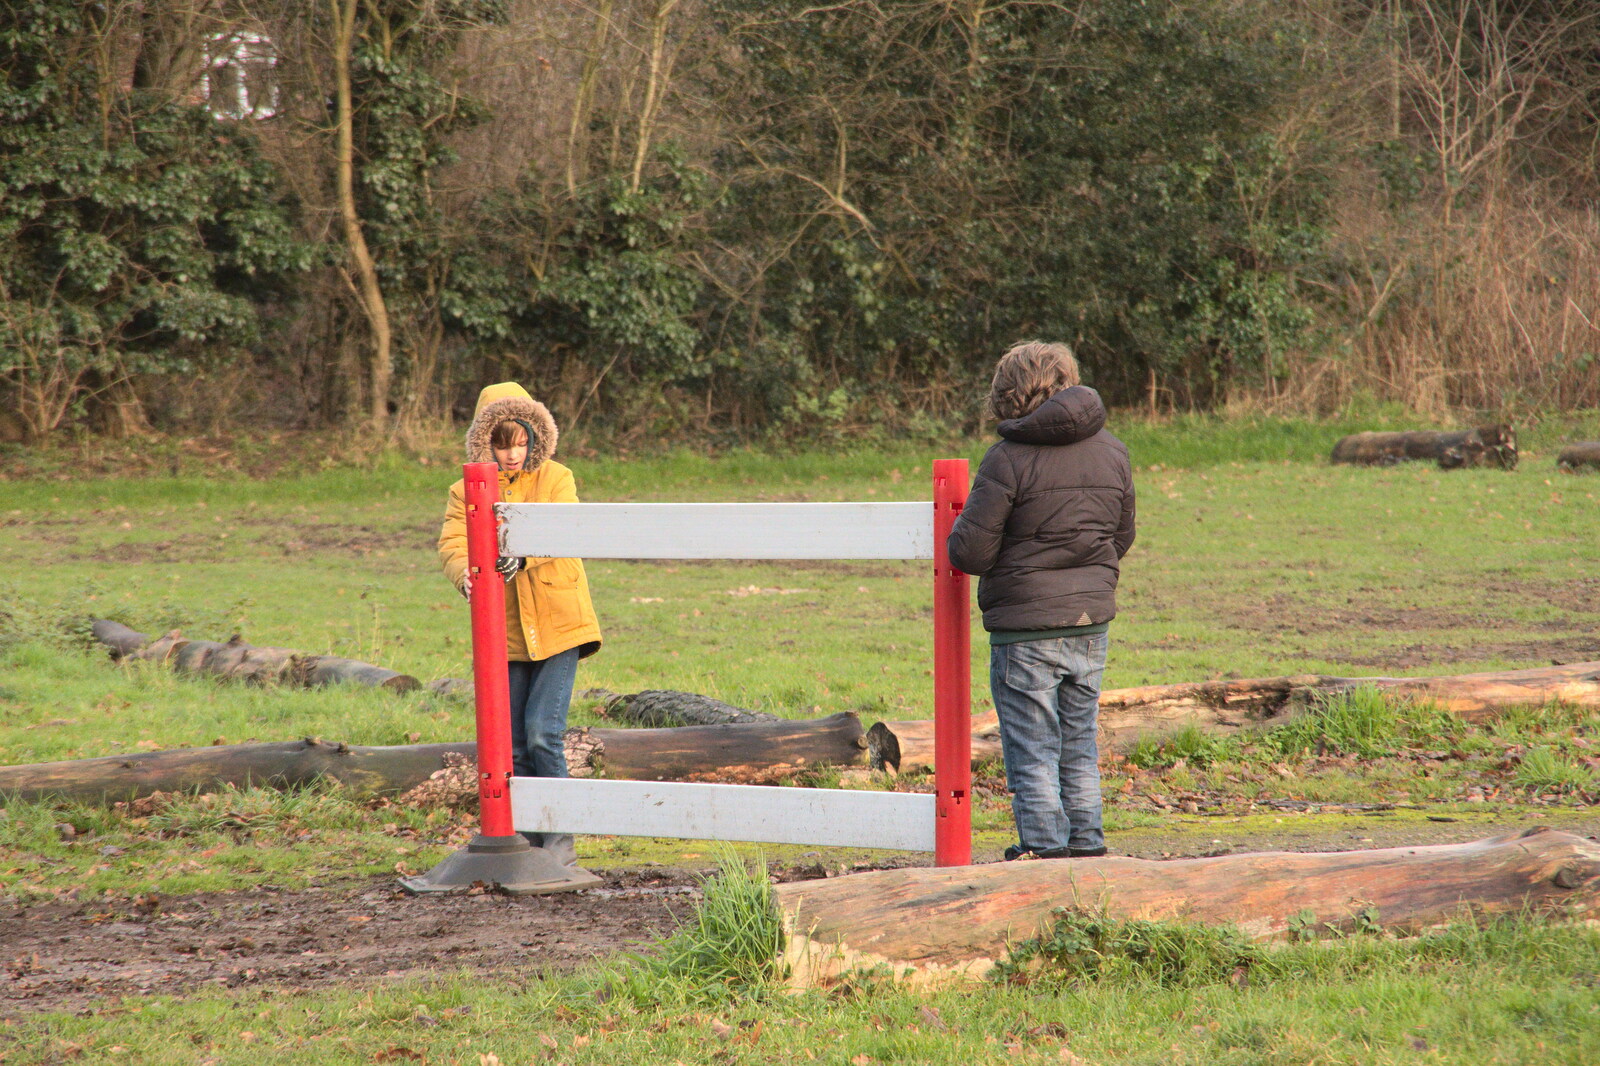 The boys move a barrier so we can get out from A Visit to Blickling Hall, Aylsham, Norfolk - 9th January 2022